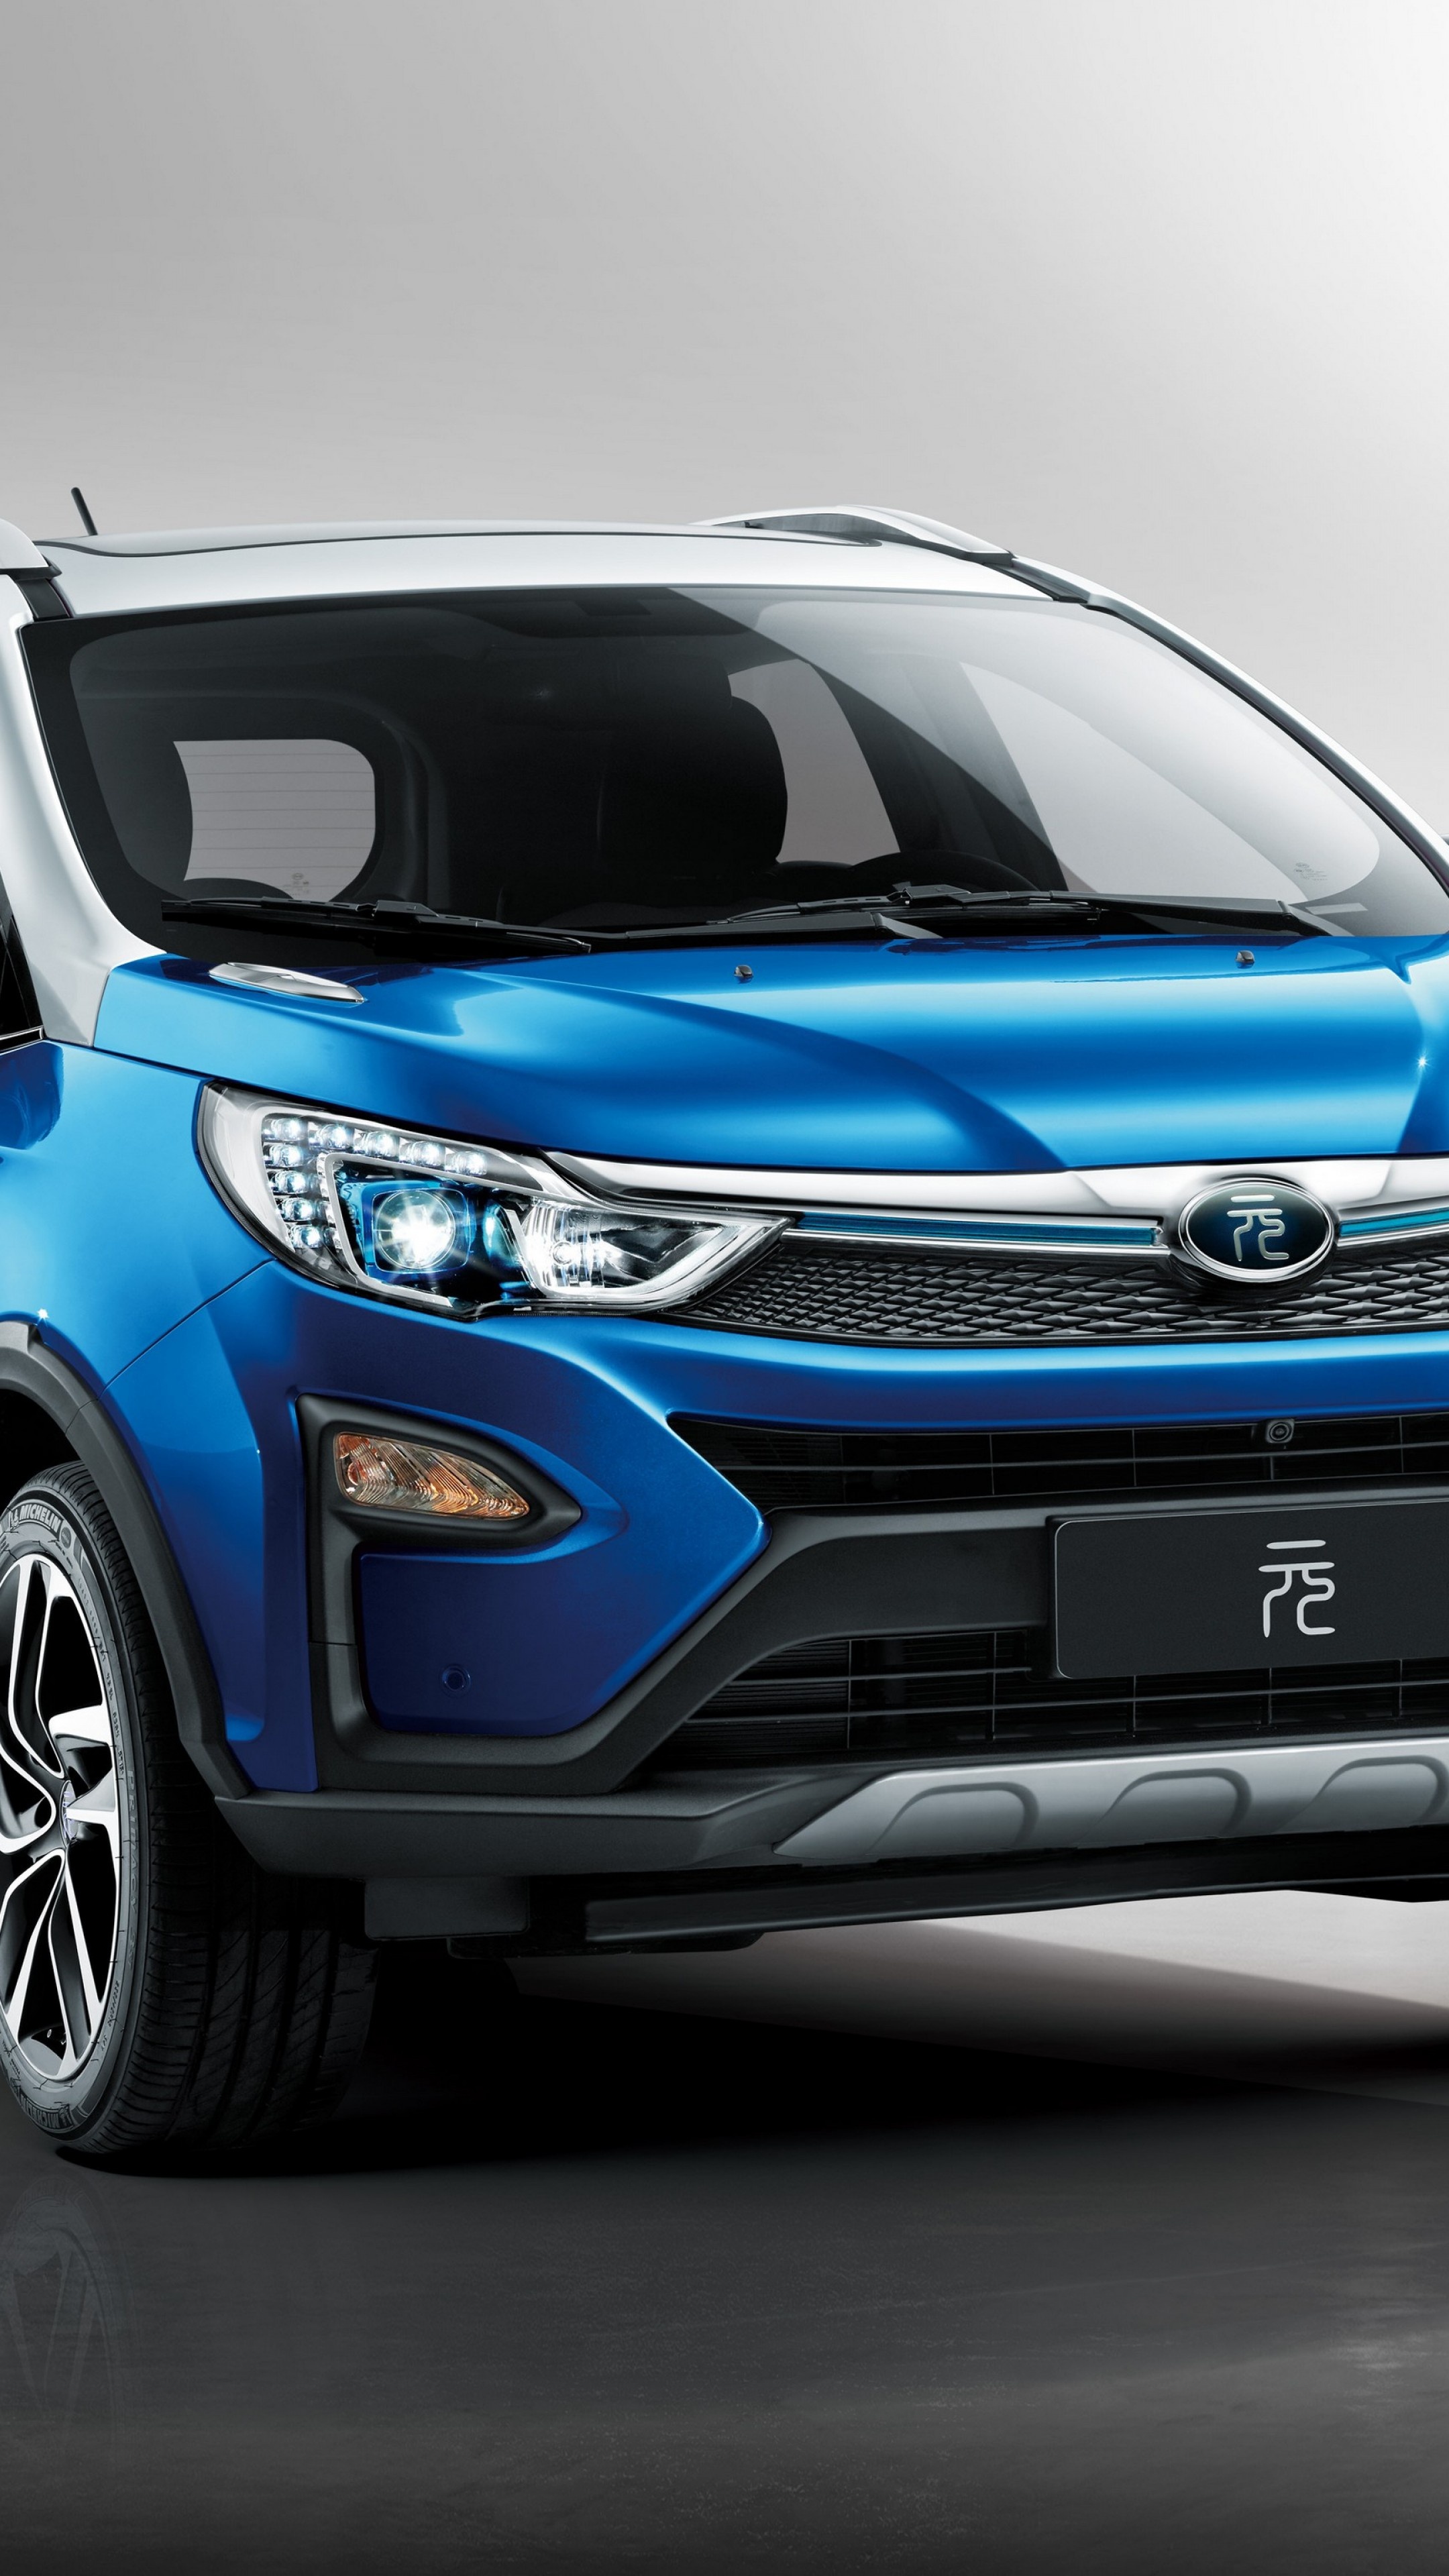 BYD Yuan crossover, Electric vehicle, Blue color, Modern design, 2160x3840 4K Handy